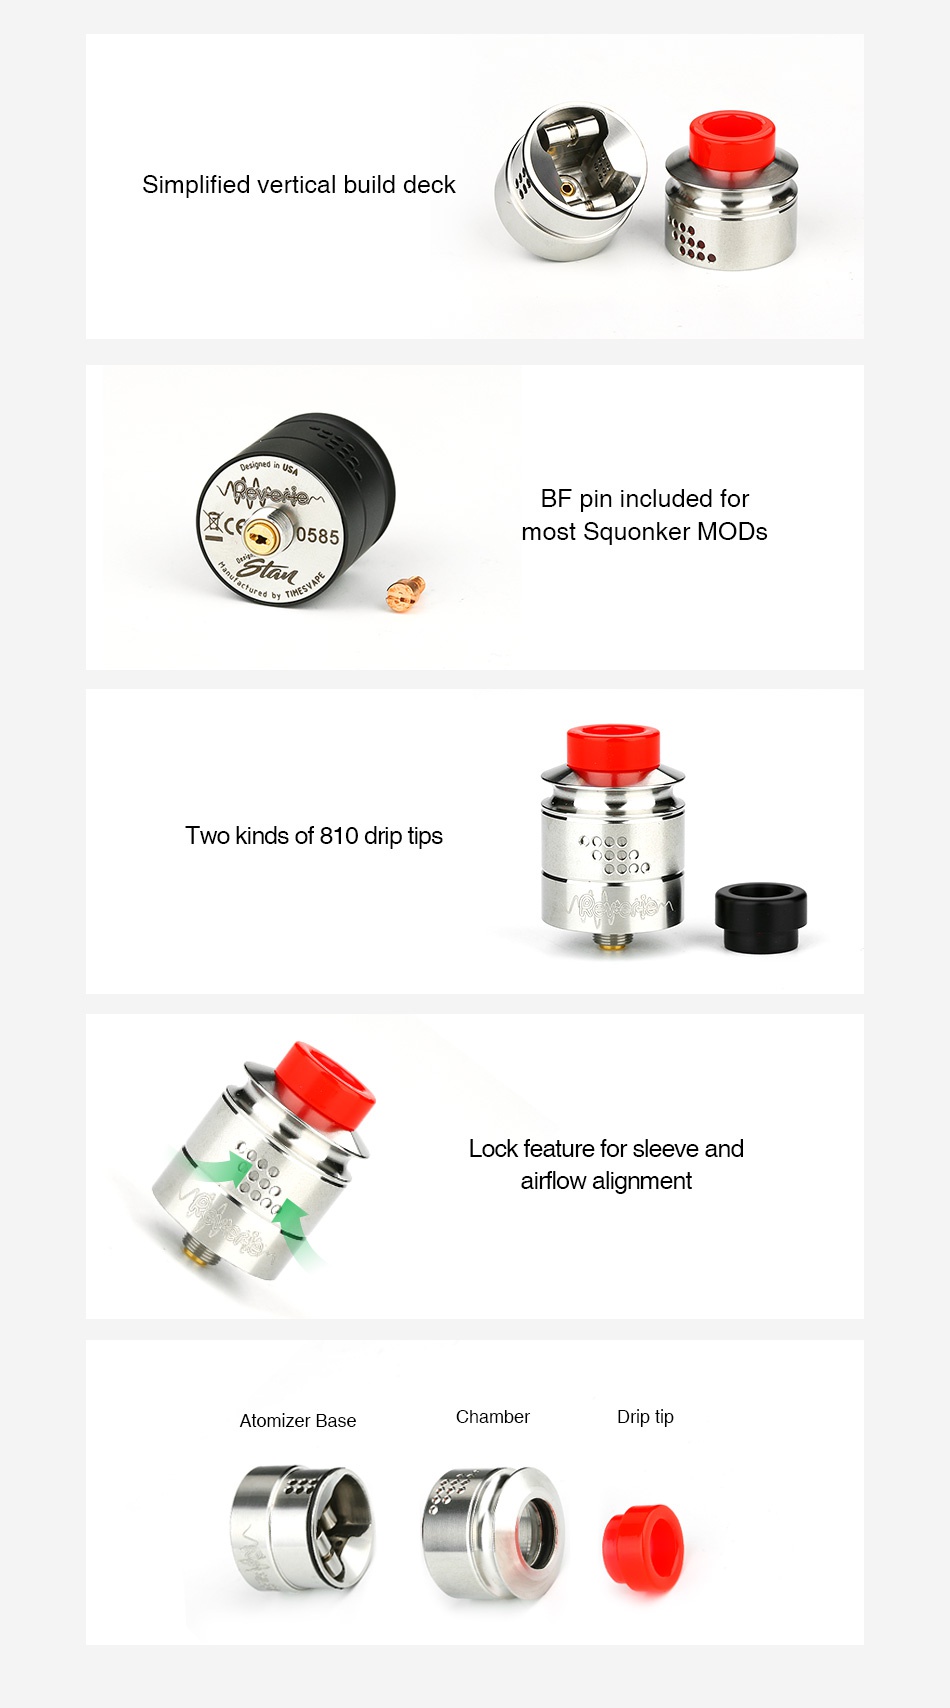 Timesvape Reverie RDA Simplified vertical build deck BF pin included for x585 most squonker Mods Two kinds of 810 drip tips Lock feature for sleeve and airflow alignment Atomizer base Chamber Drip tip